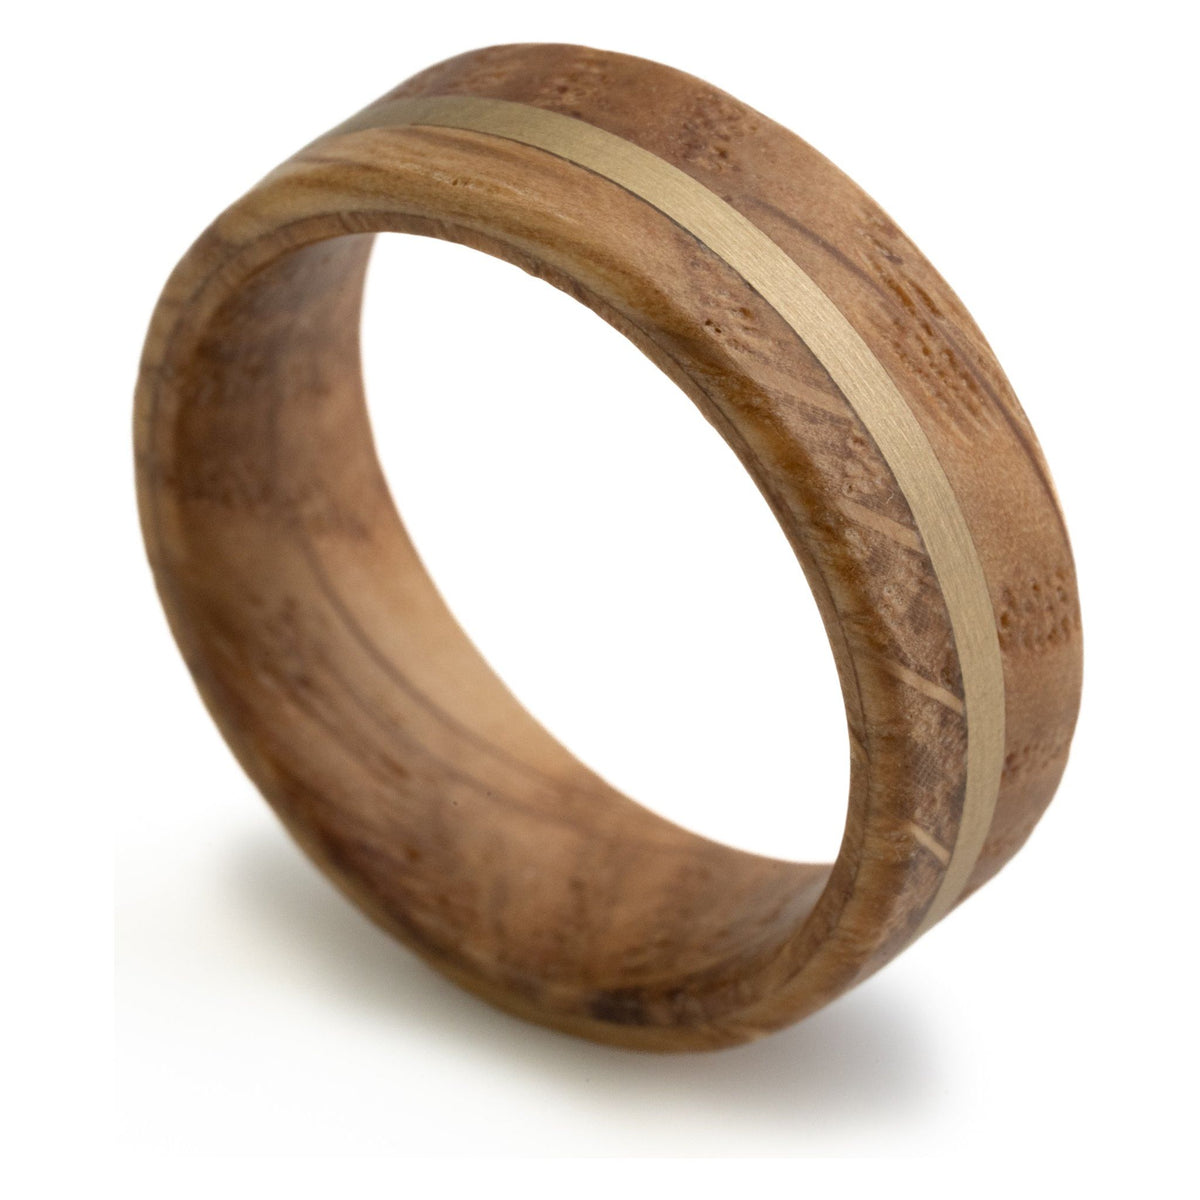 The “Whiskey River” Ring